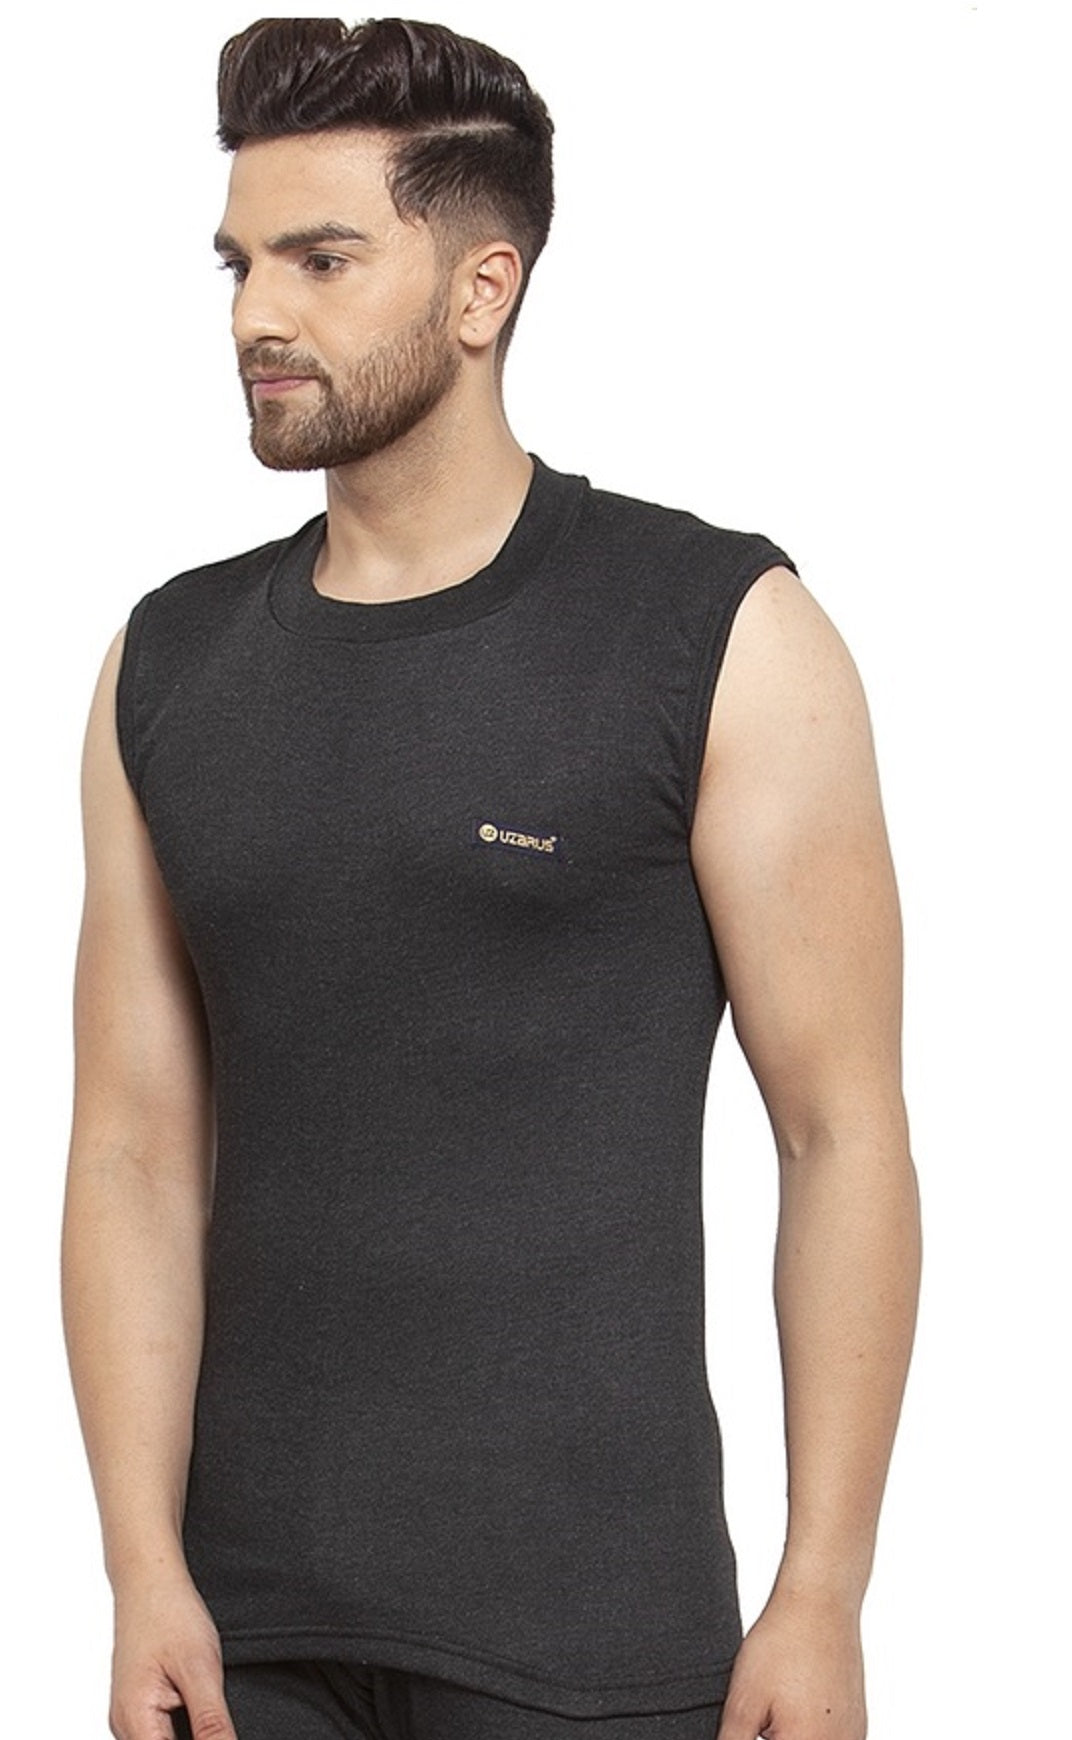 MEN'S SLEEVELESS SOLID ROUND NECK THERMAL TOP